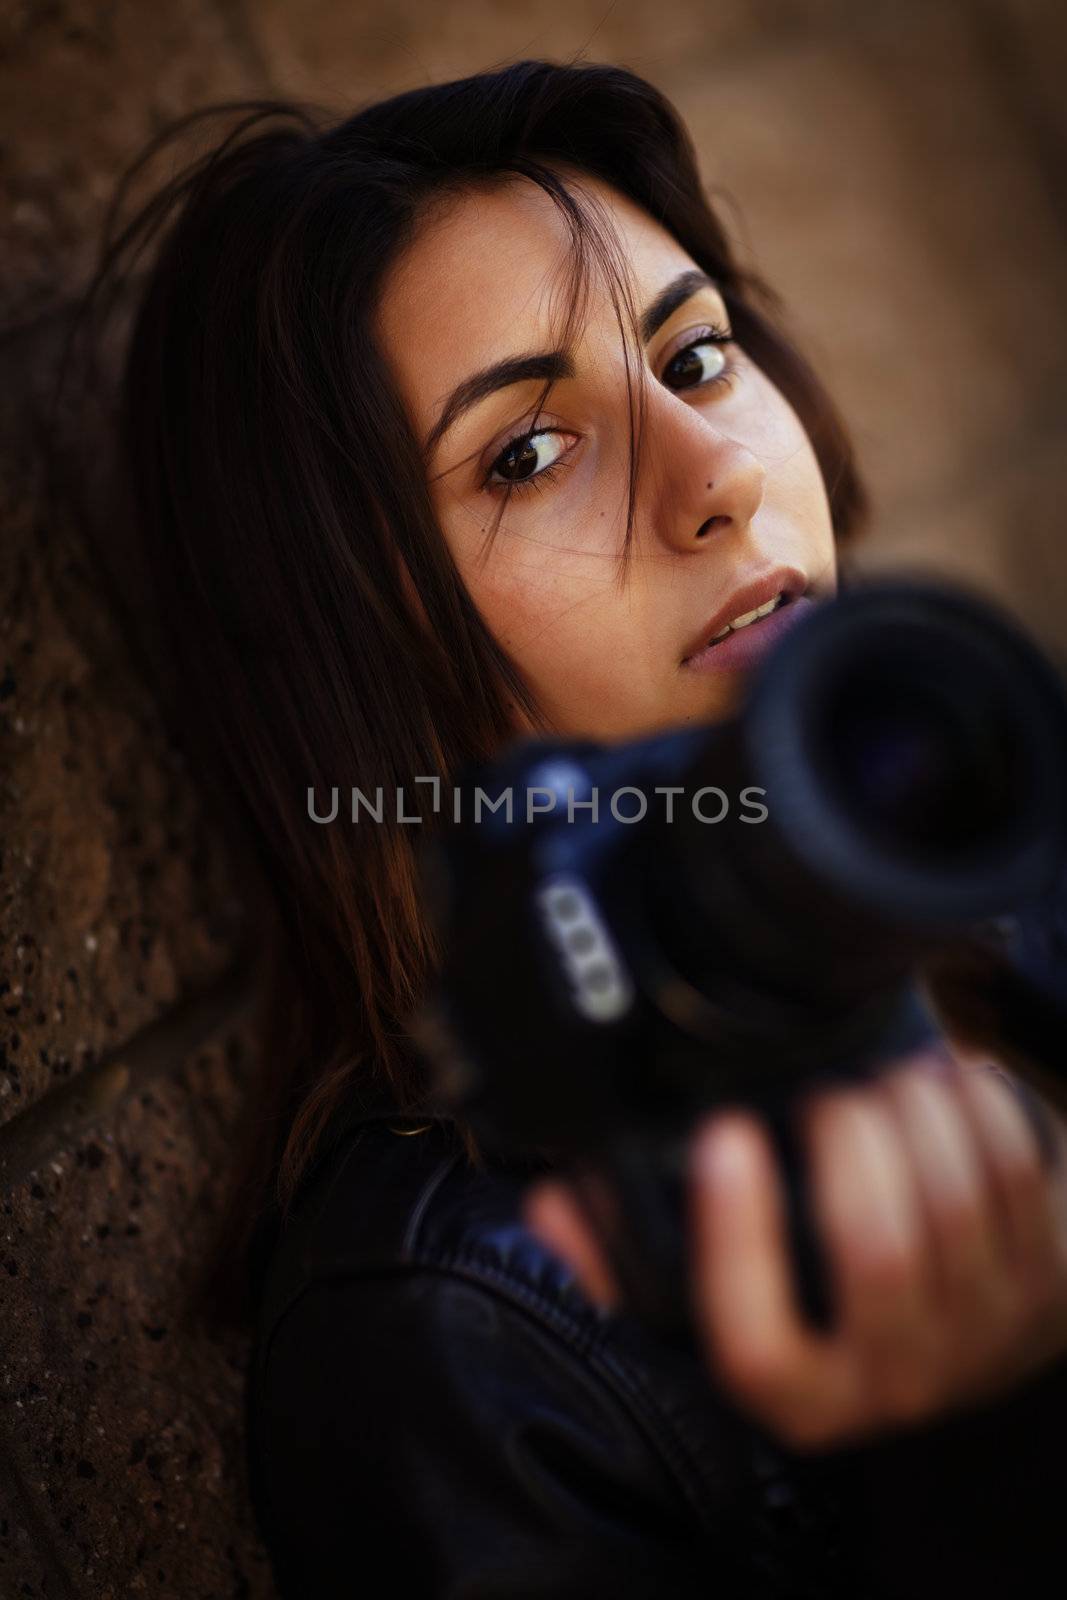 Mixed Race Young Adult Female Photographer Holding Camera by Feverpitched